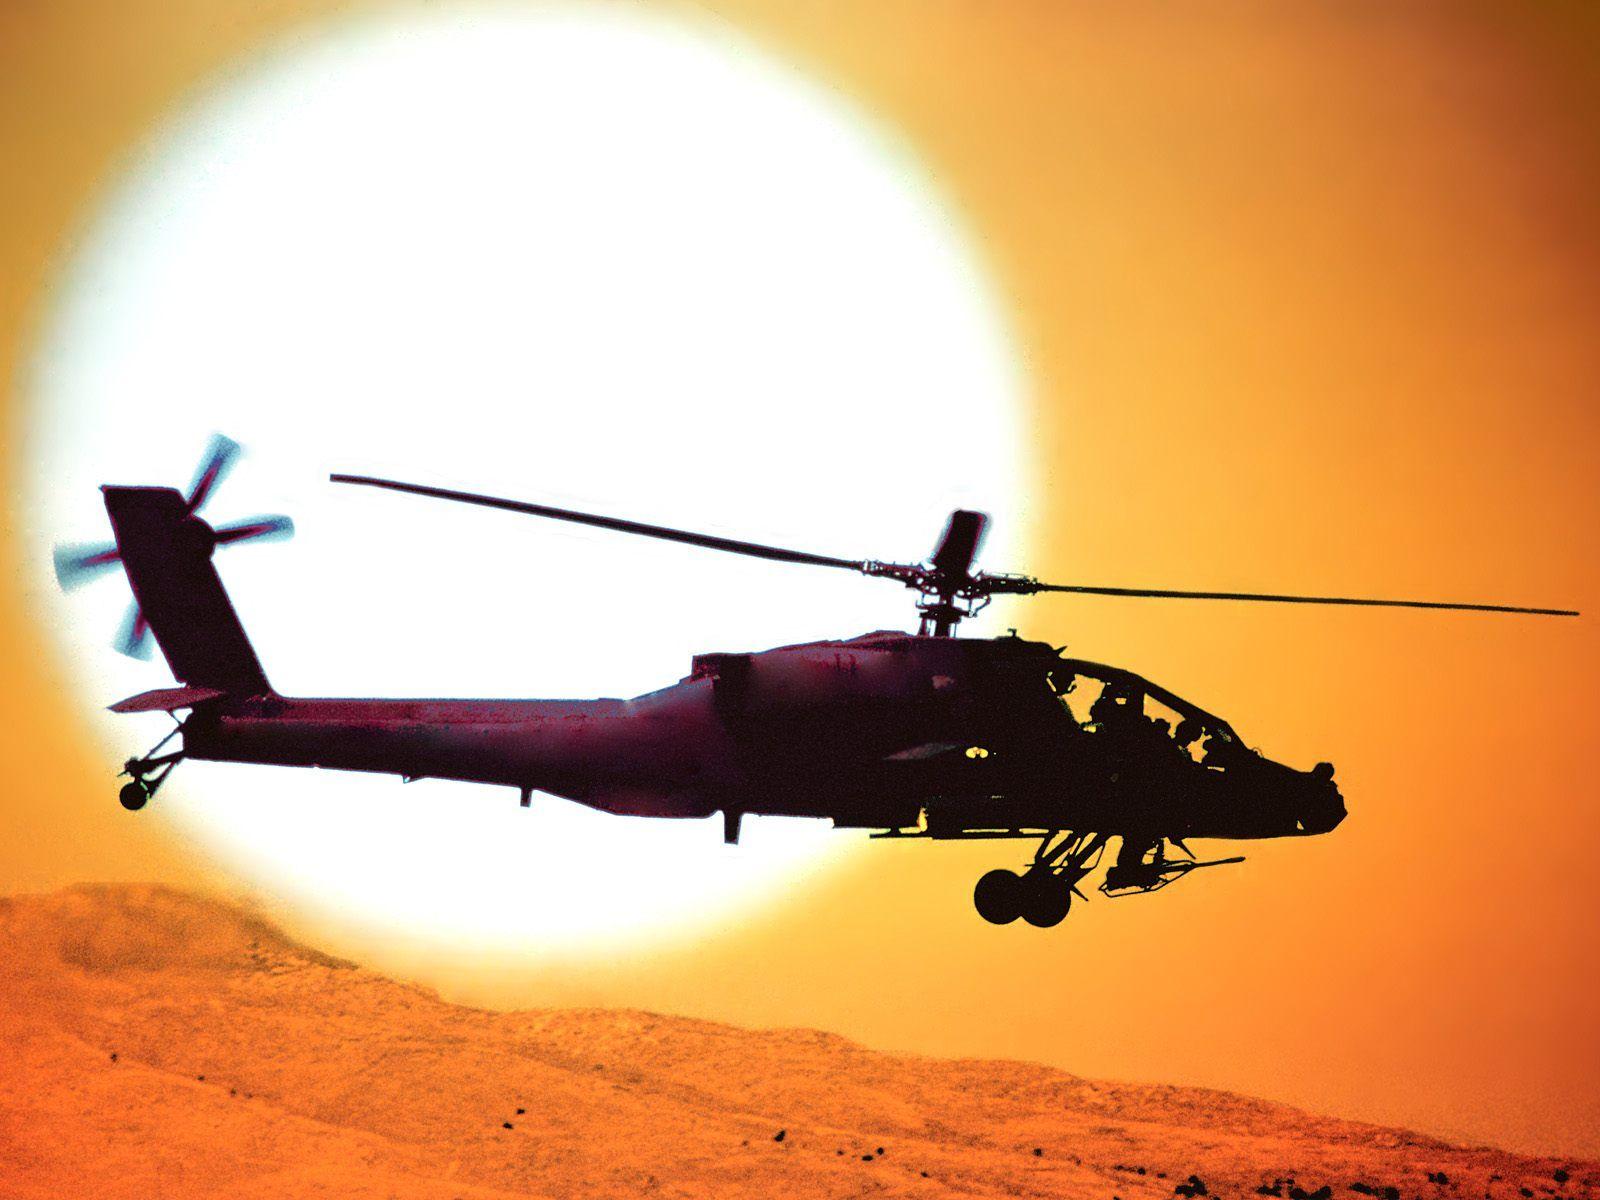 us army image public domain. image of us army attack helicopter